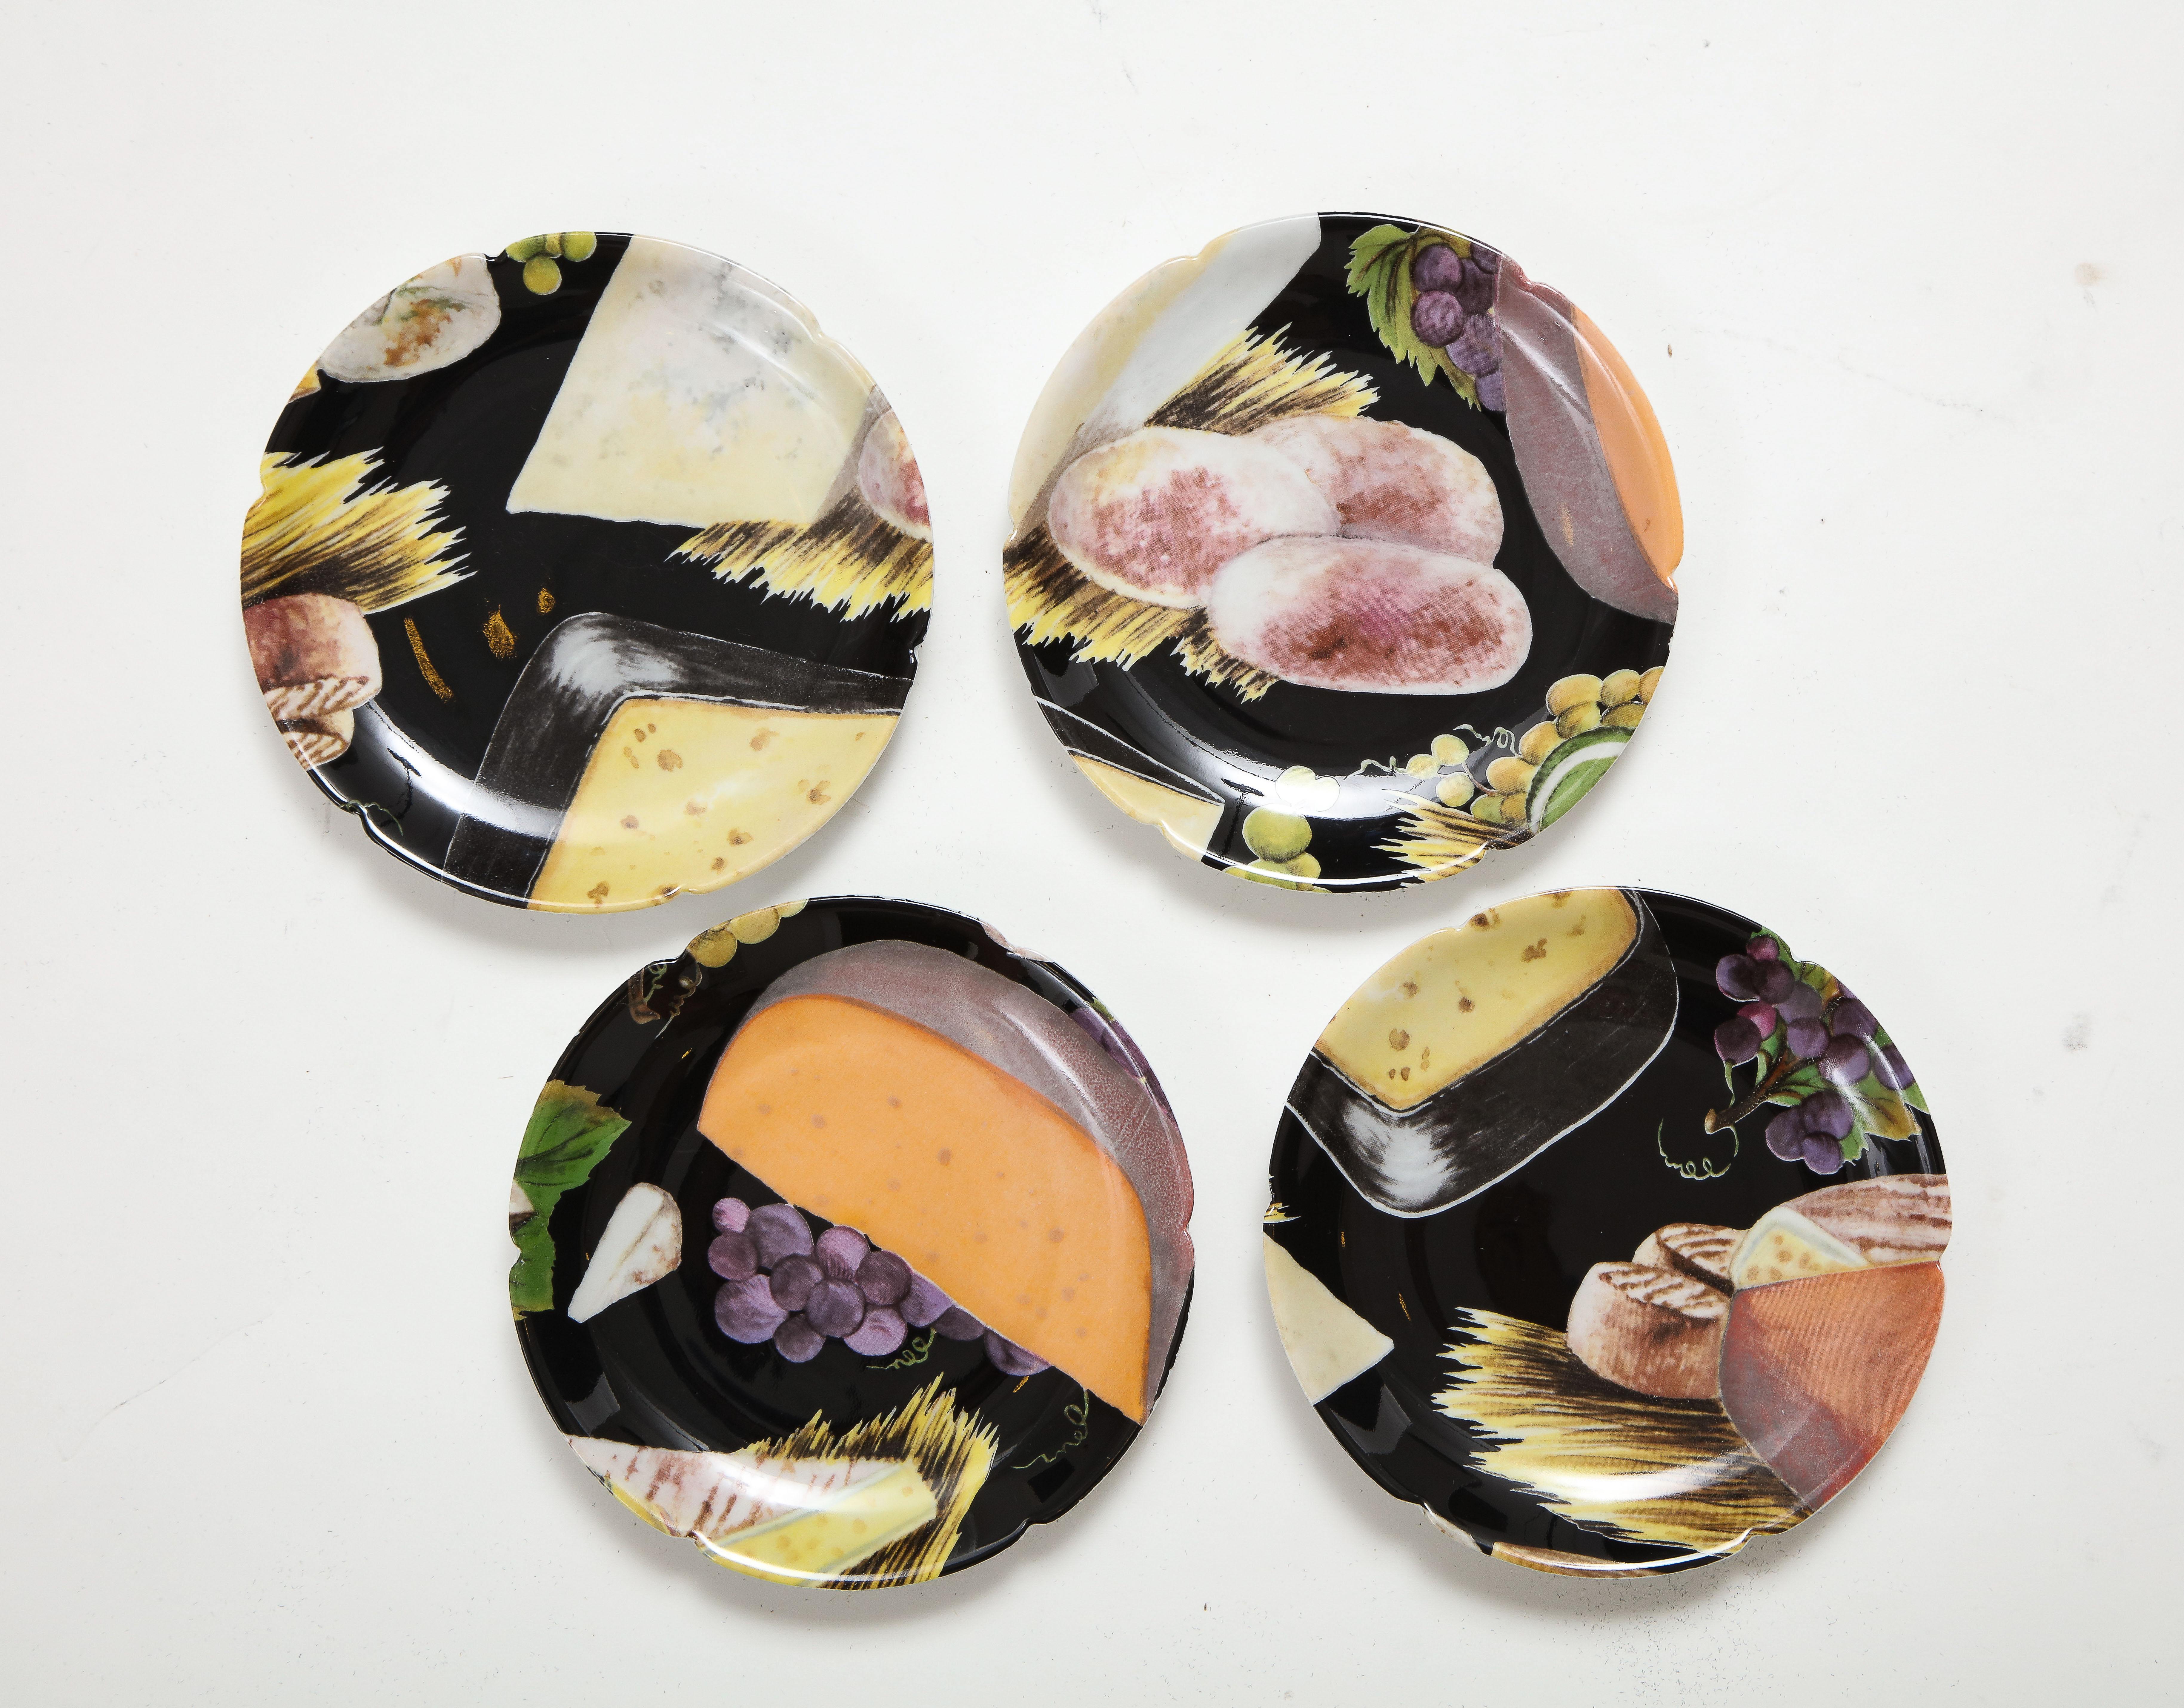 Set of 18 porcelain side plates depicting various wine and cheese motifs. Signed on backs.